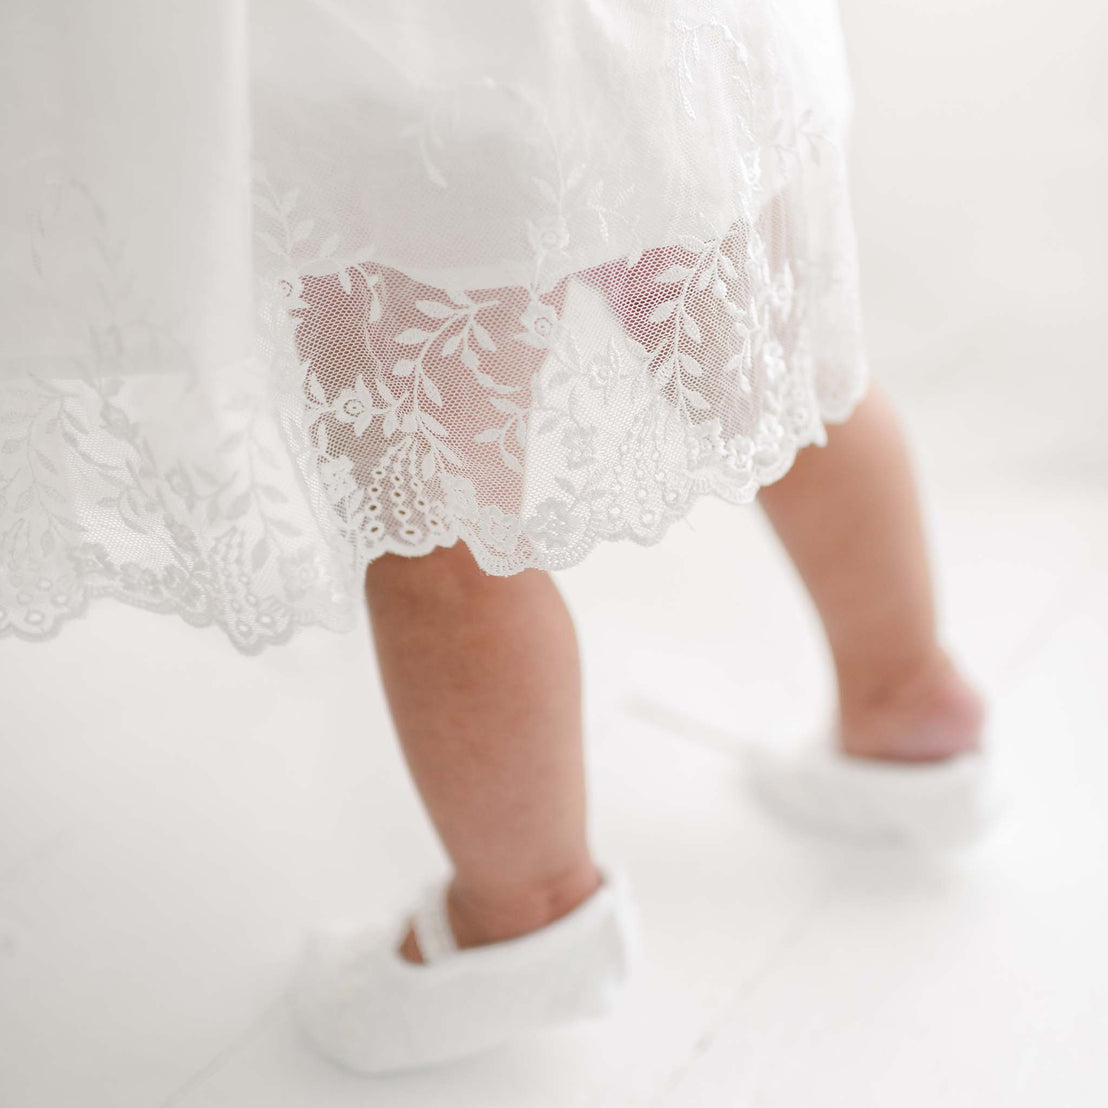 A close-up image of a baby wearing an Ella Romper Dress featuring embroidered netting lace, standing and showing only the legs and feet. The baby is also wearing white shoes with delicate patterns. The background is softly lit and neutral in color.